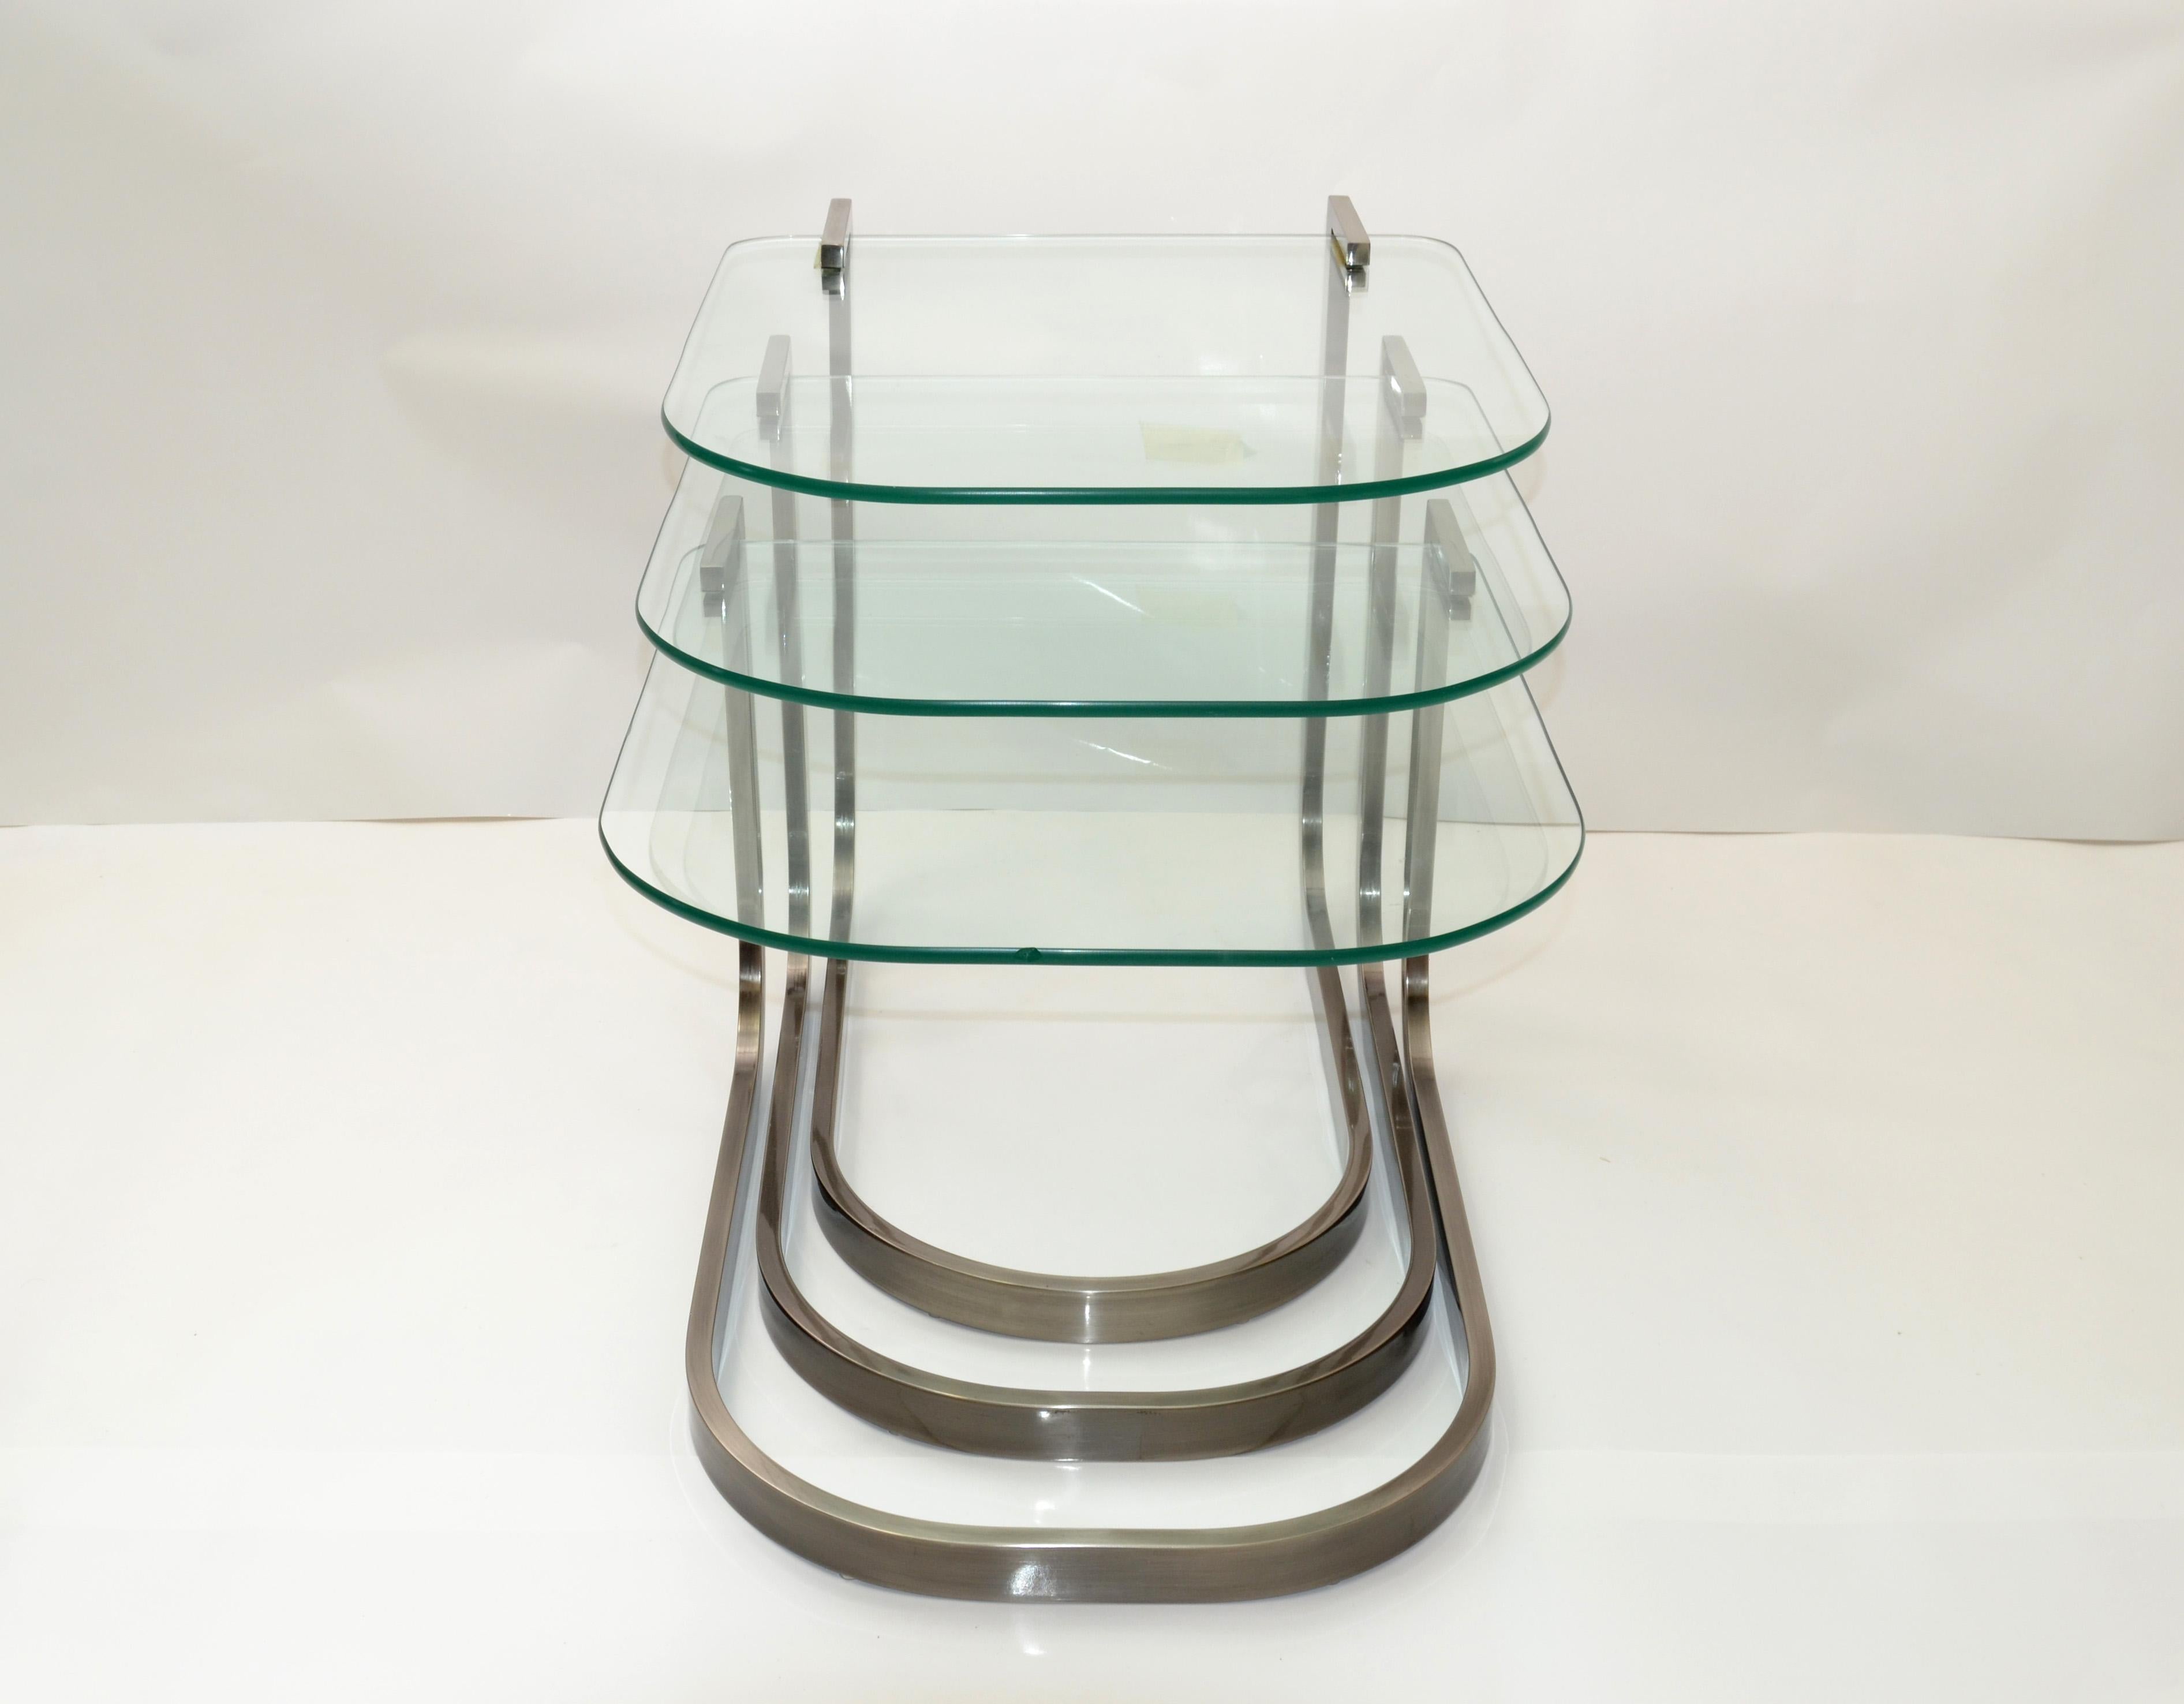 Mid-Century Modern design Institute of America 'DIA' unusual shape of glass & brushed steel nesting table set.
Modern design with a stunning look.
Measures: H 22.25 inches x W 20 inches x D 24 inches, Glass 22 inches.
H 19 inches x W 20 inches x